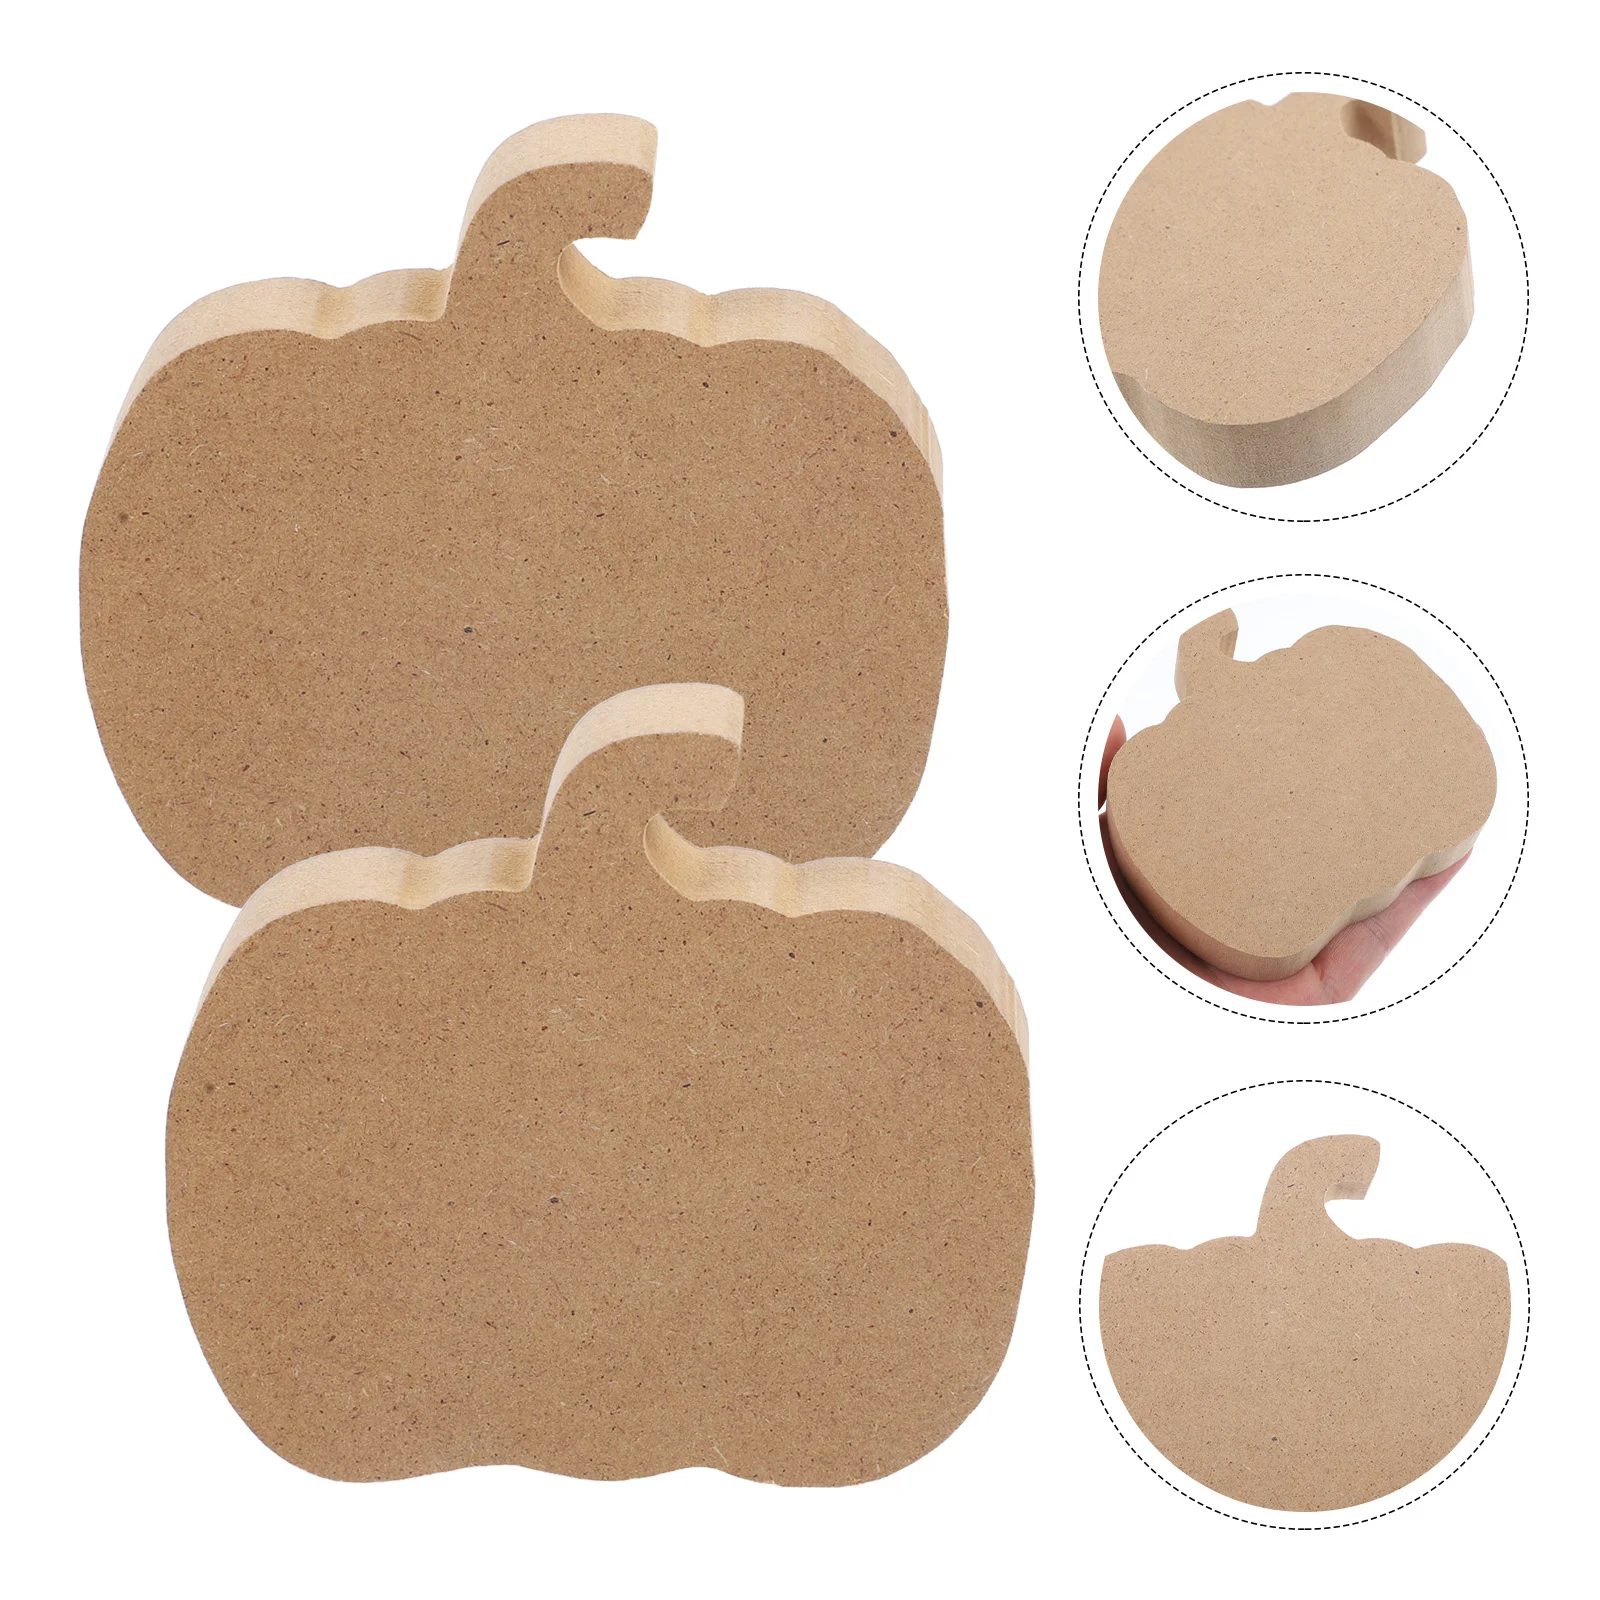 

10 Pcs Tag Wooden Blank Cutouts Ornaments Chip DIY Decorate Supplies Unfinished Craft Pumpkin Crafts